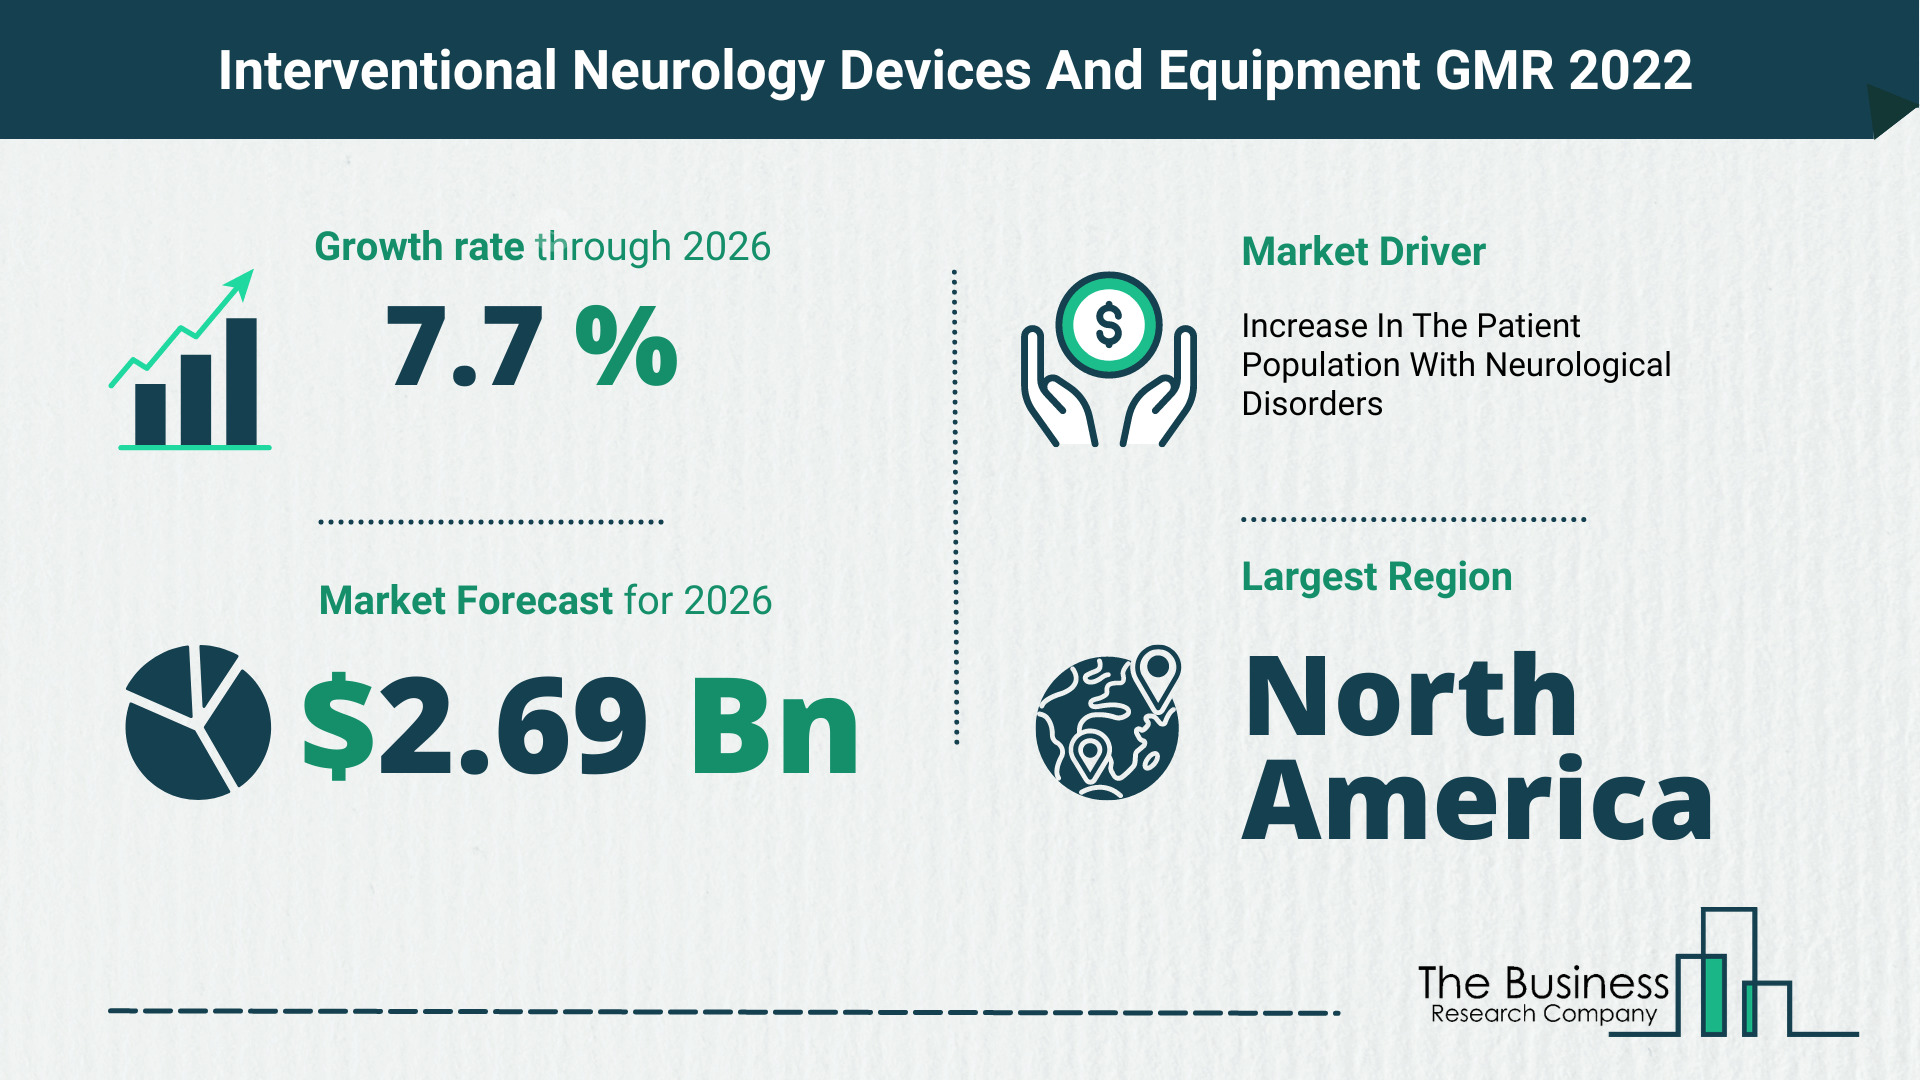 How Will The Interventional Neurology Devices And Equipment Market Grow In 2022?